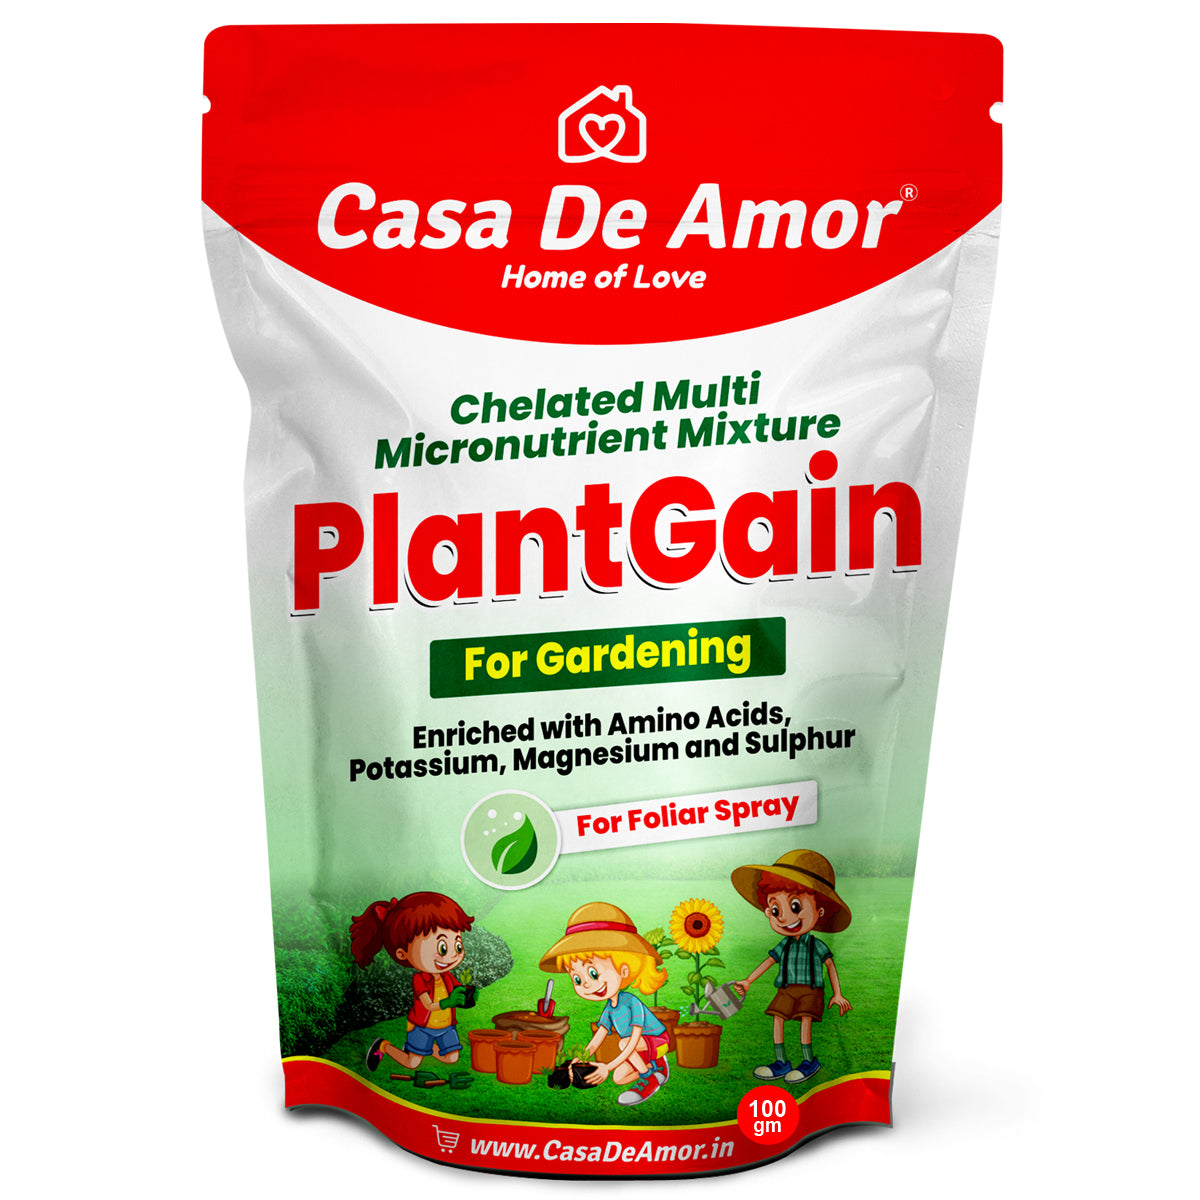 Casa De Amor Plant Gain Chelated Multi Micronutrient Mixture, Foliar Spray for All Plants, Boosts Photosynthesis and Corrects Common Yellowing